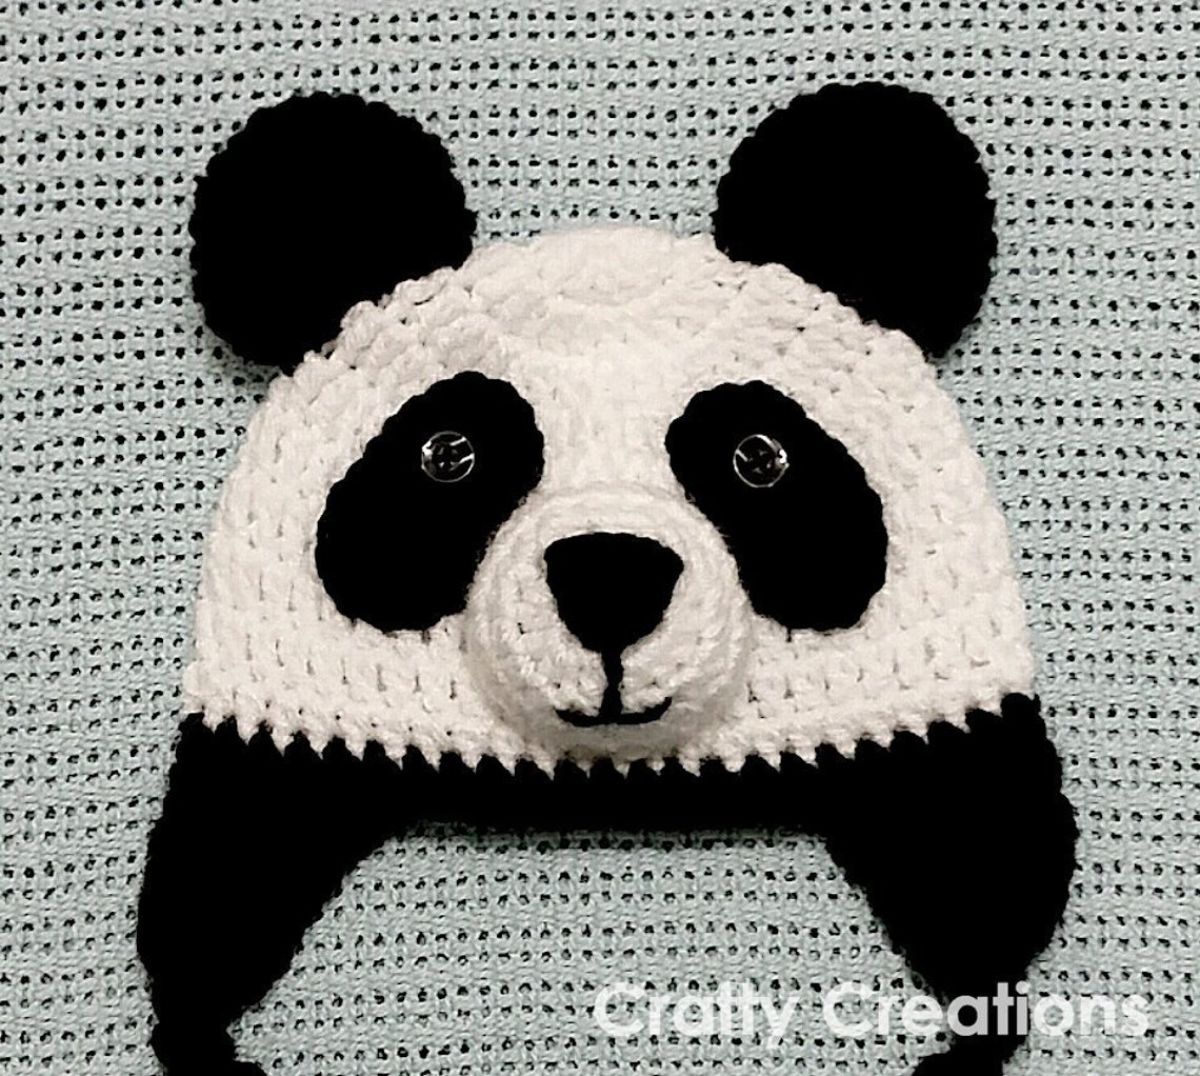 Black and white crochet panda beanie with black flaps and string to fasten on a pale green crochet blanket.